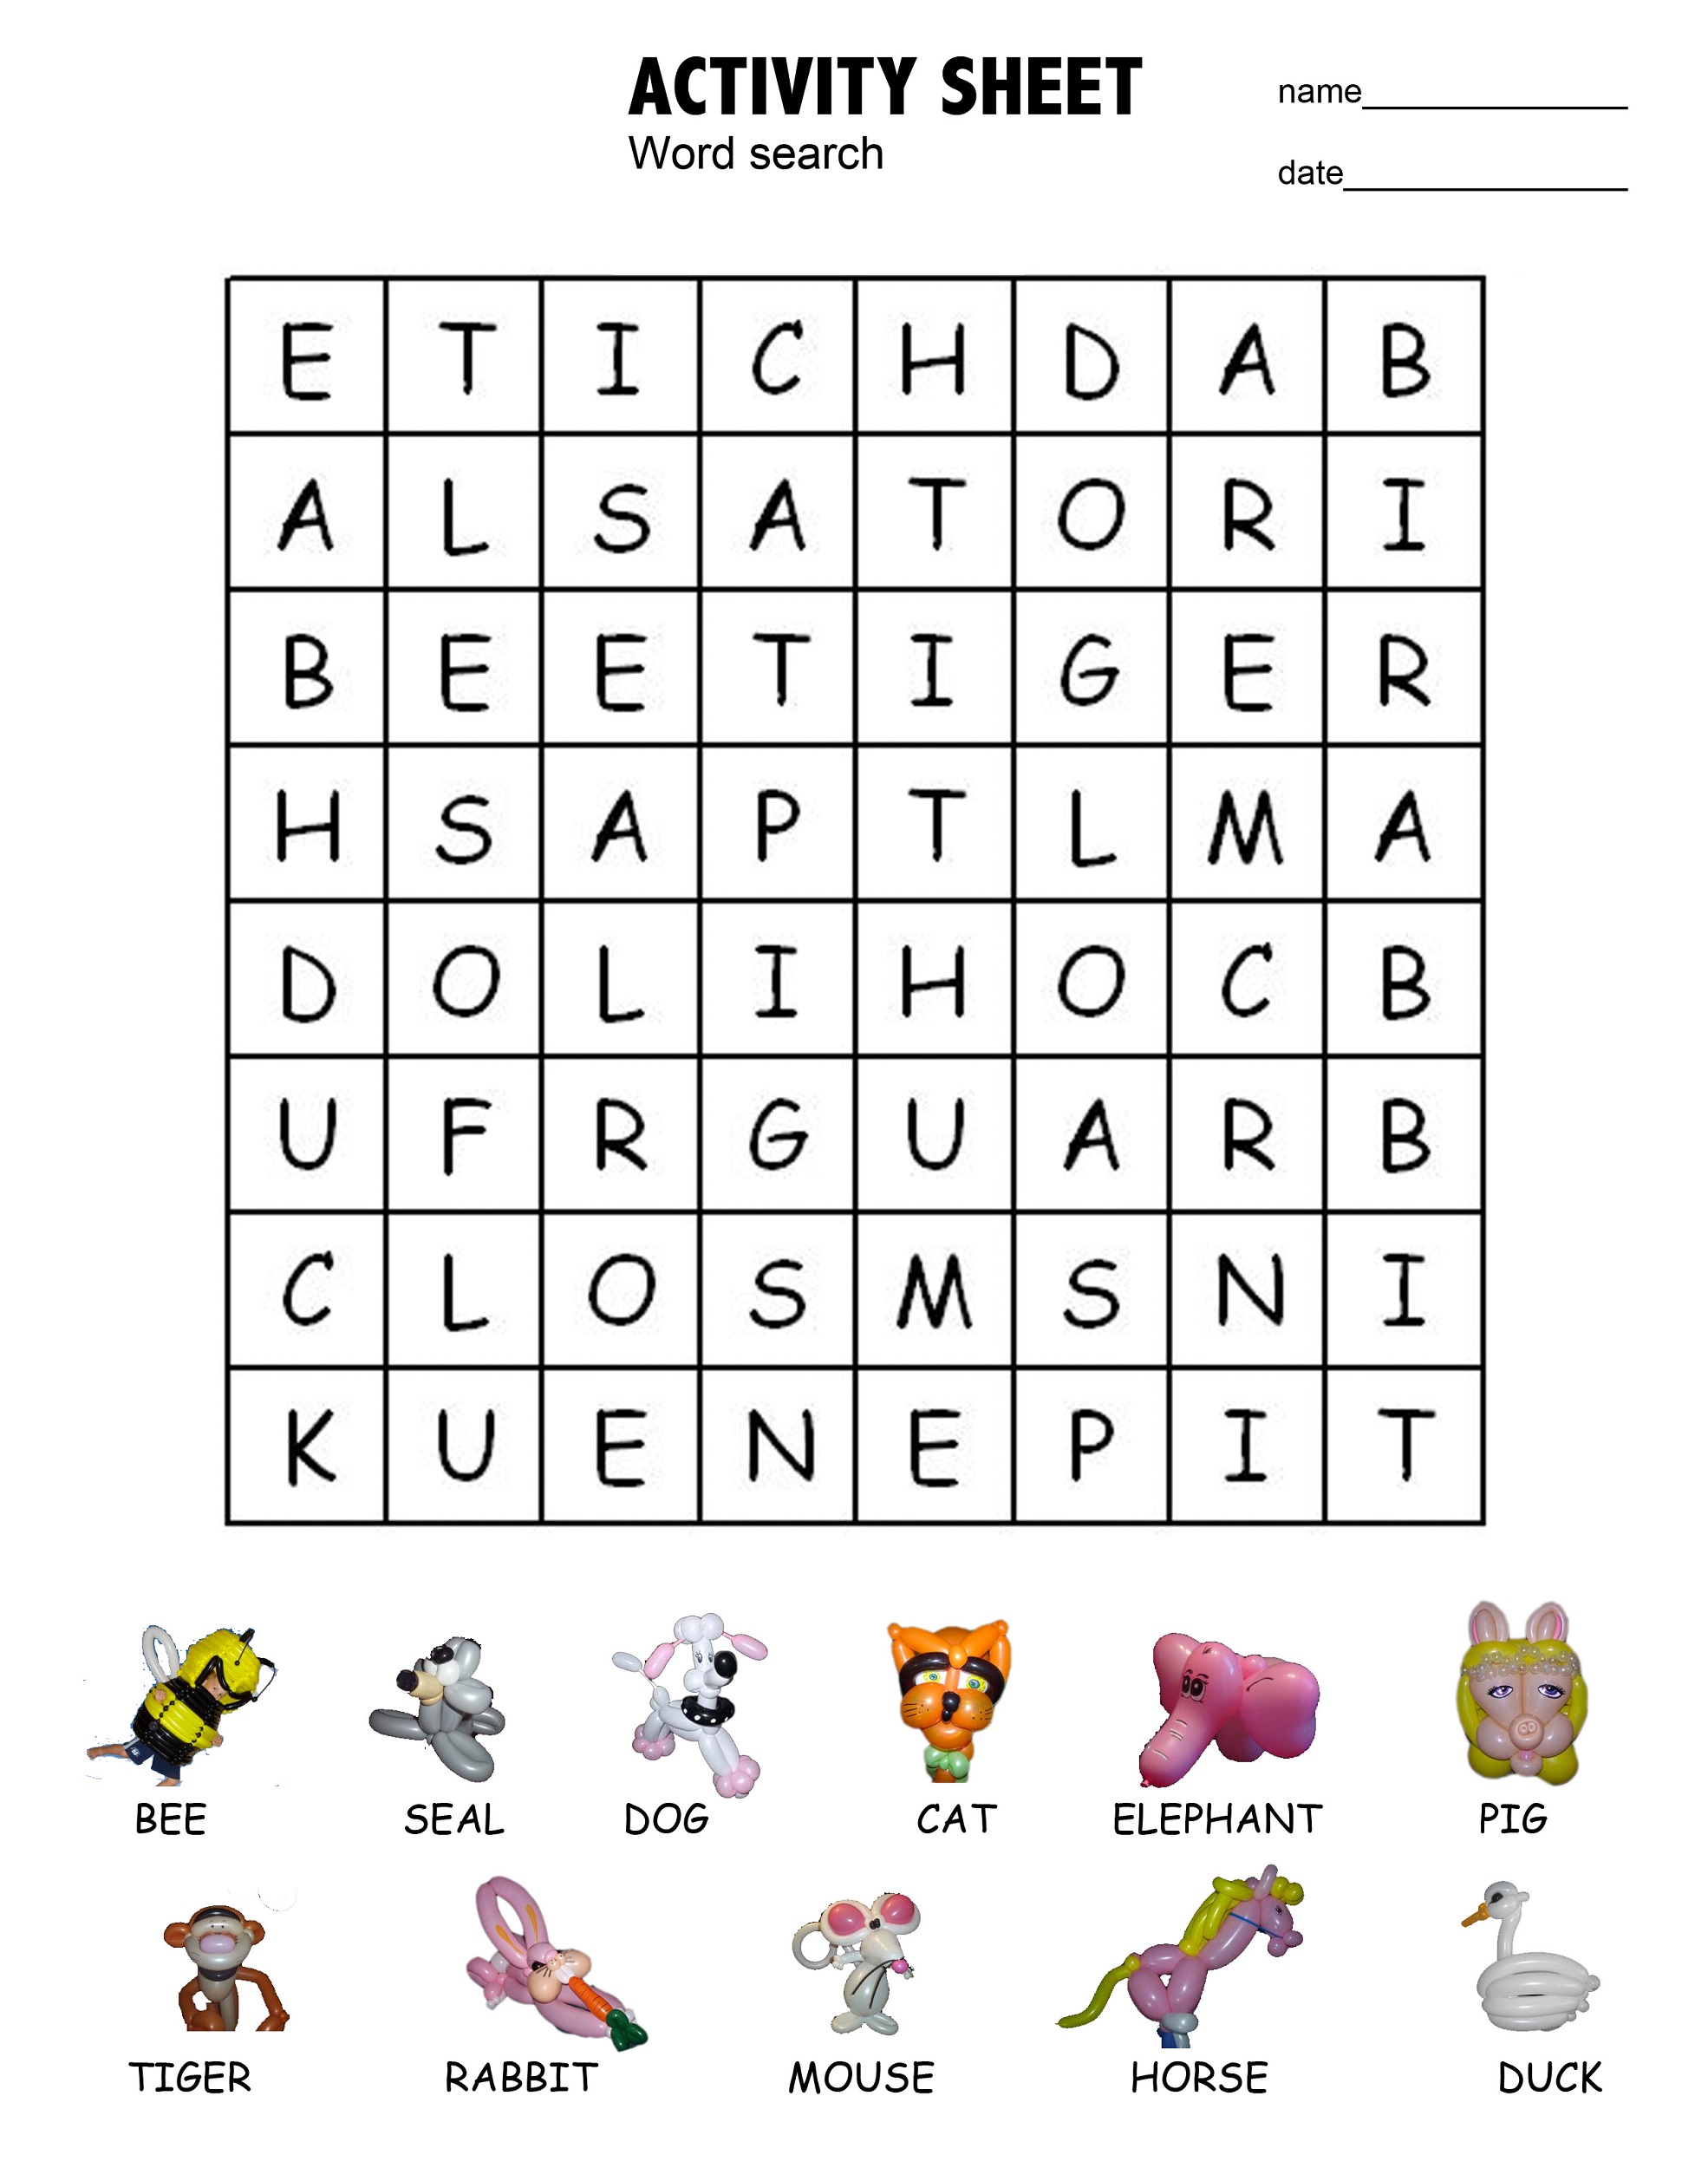 kids word searches printable activity shelter - 5 fun christmas word ...